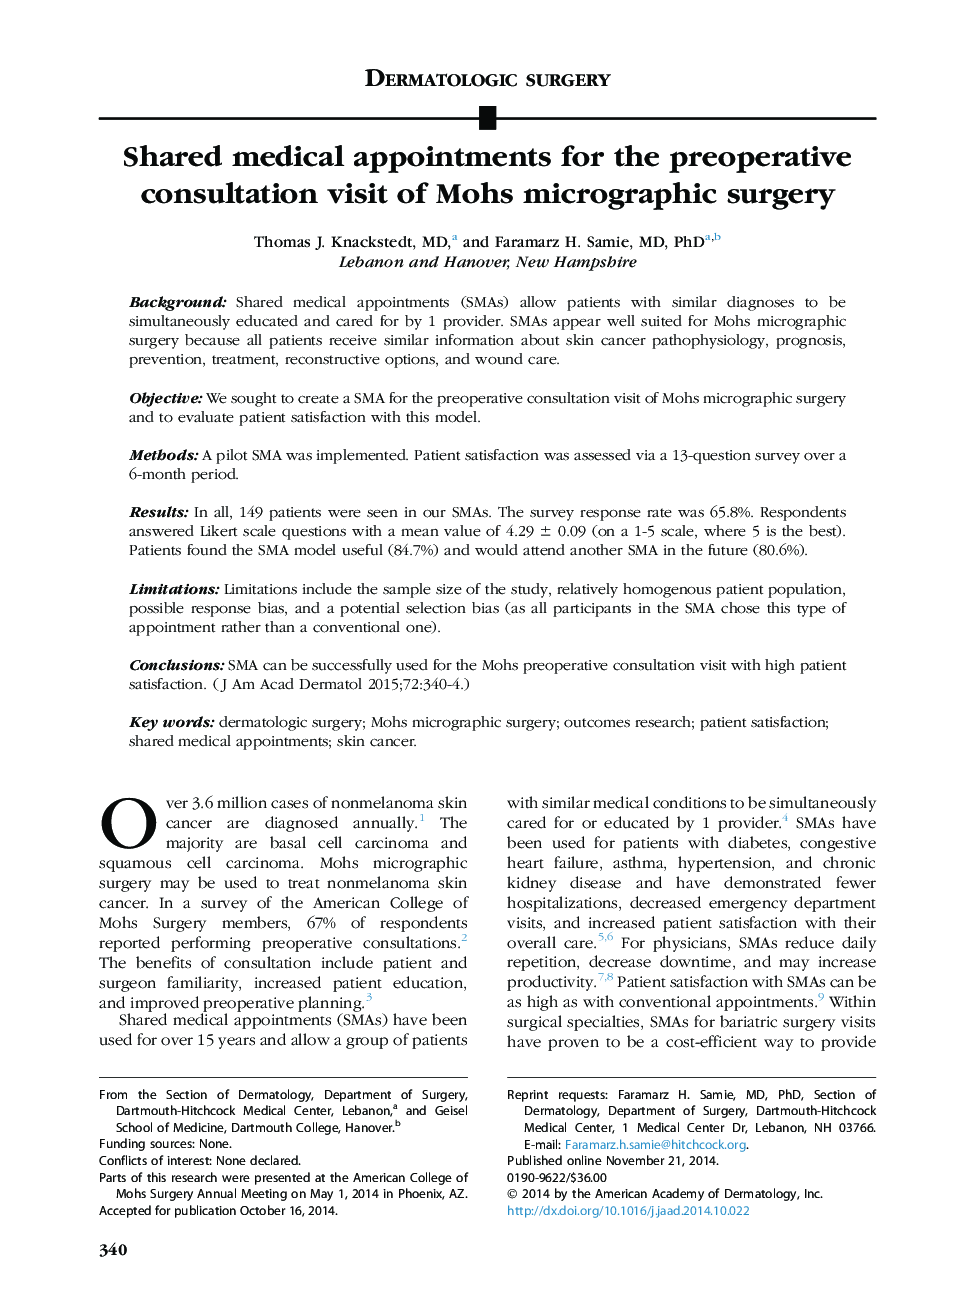 Shared medical appointments for the preoperative consultation visit of Mohs micrographic surgery 